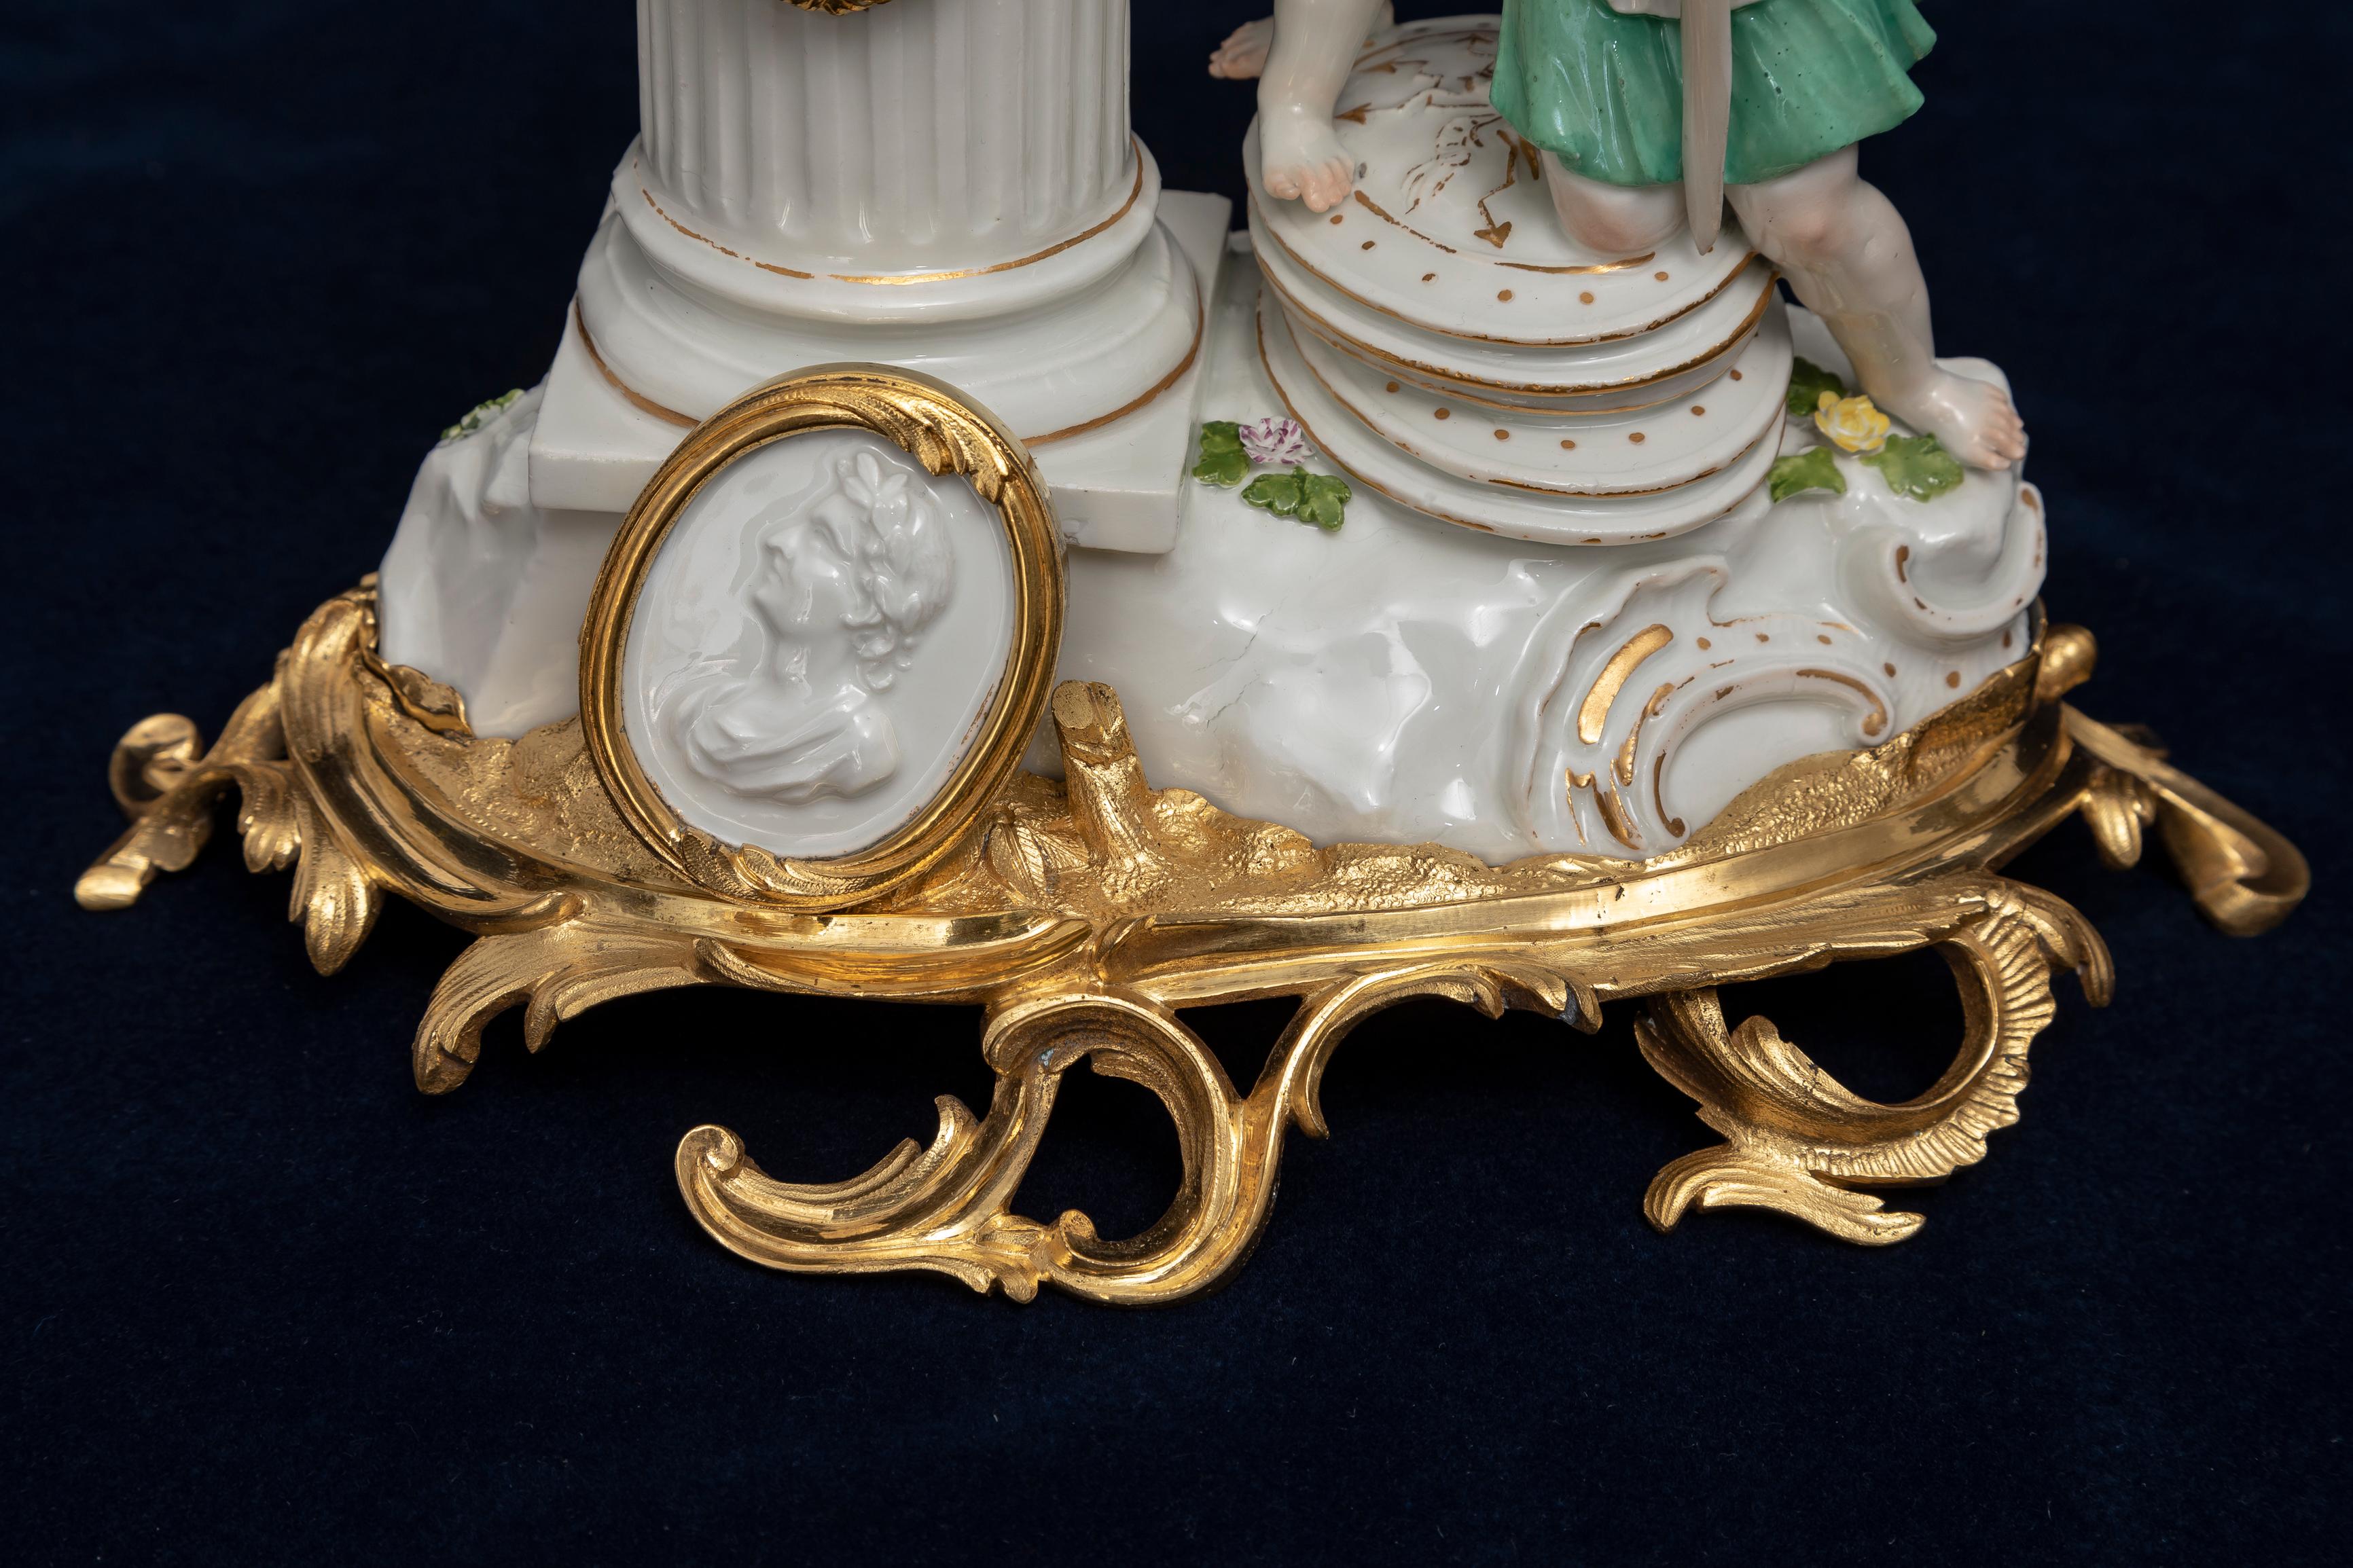 An Important Rare 18th C. Ormolu Mounted Meissen Porcelain Putti Clock Grouping For Sale 9